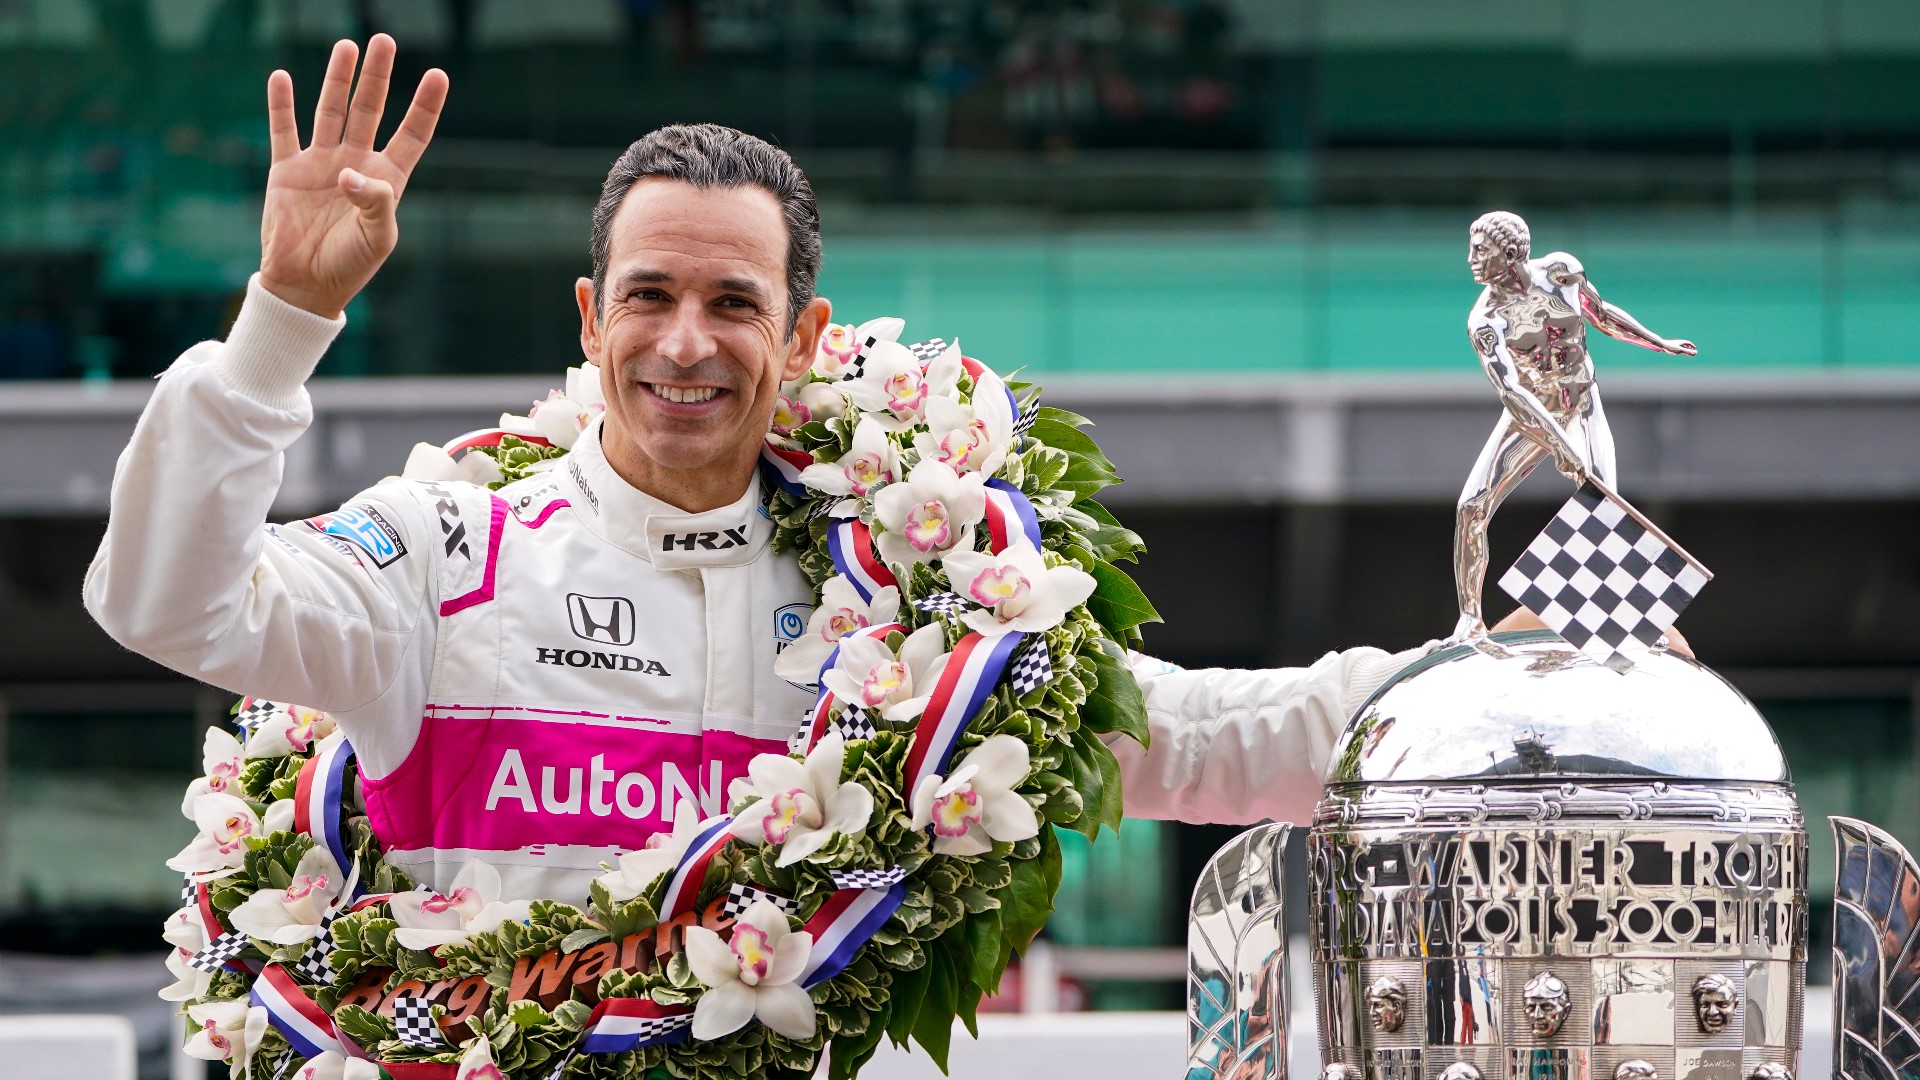 13 Sports' Dave Calabro talks with 4-time Indy 500 winner Hélio Castroneves about what it takes to go for a fifth win.